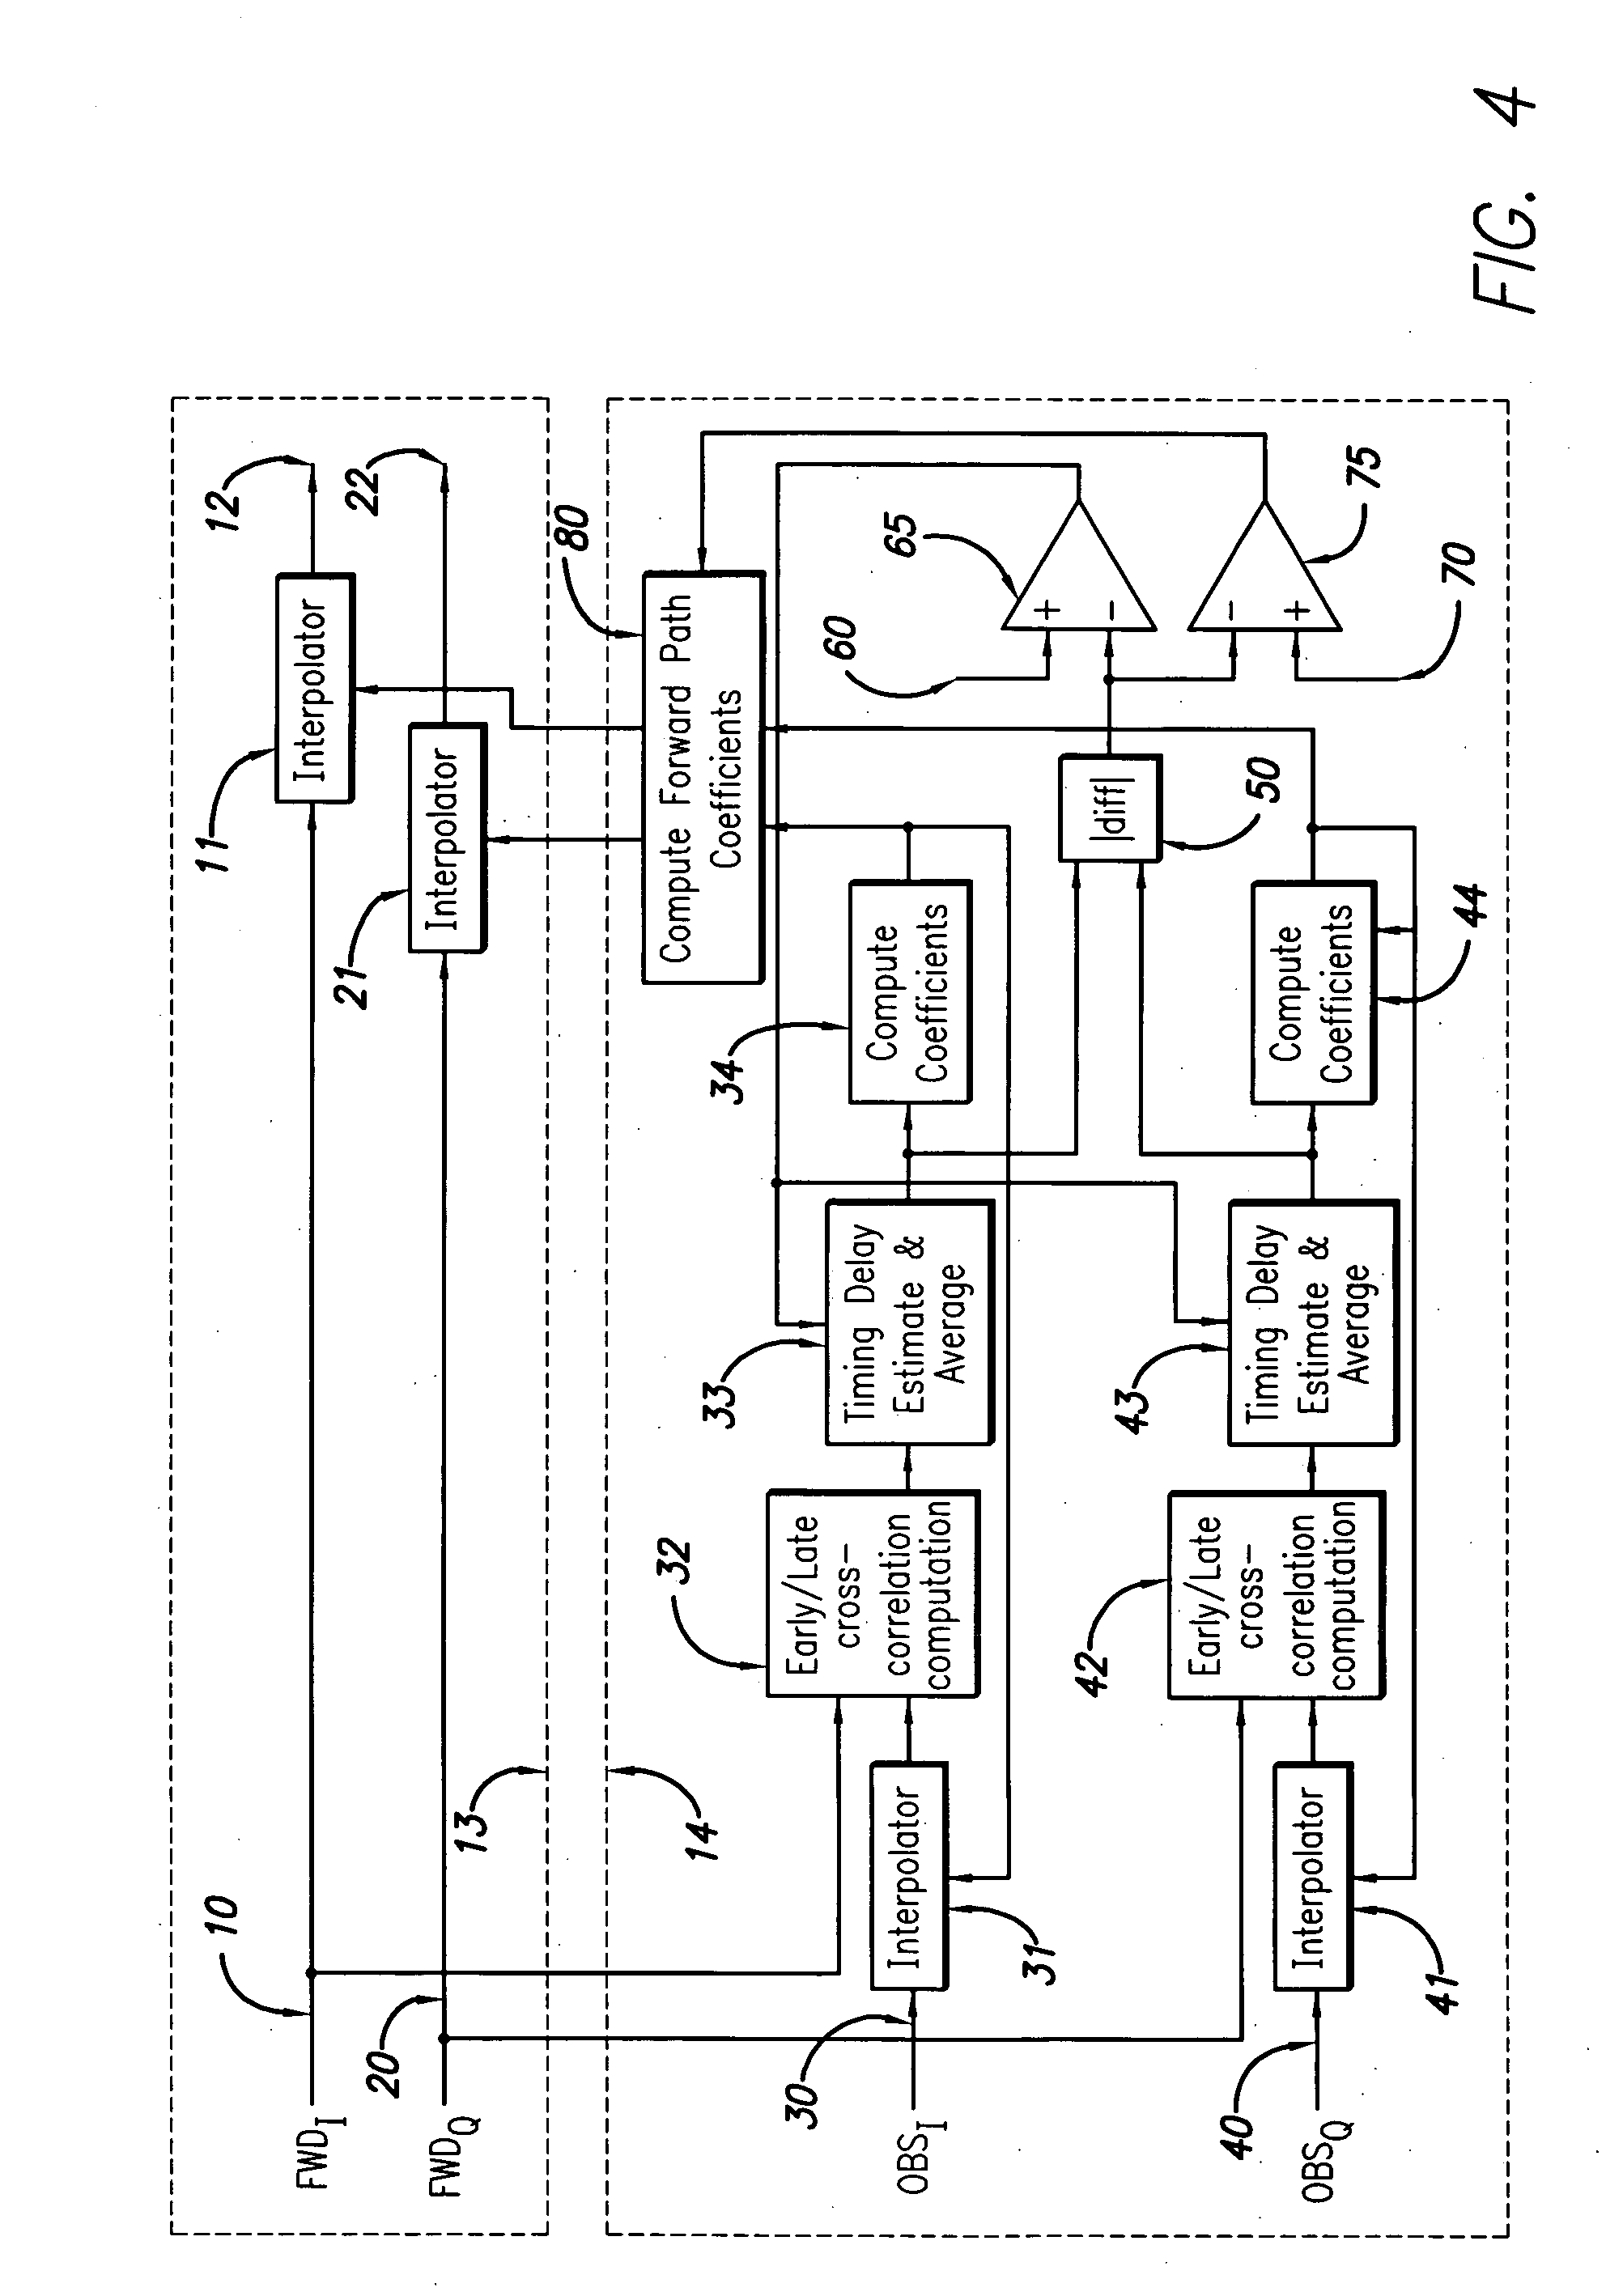 System and method for differential IQ delay compensation in a communications system utilizing adaptive AQM compensation